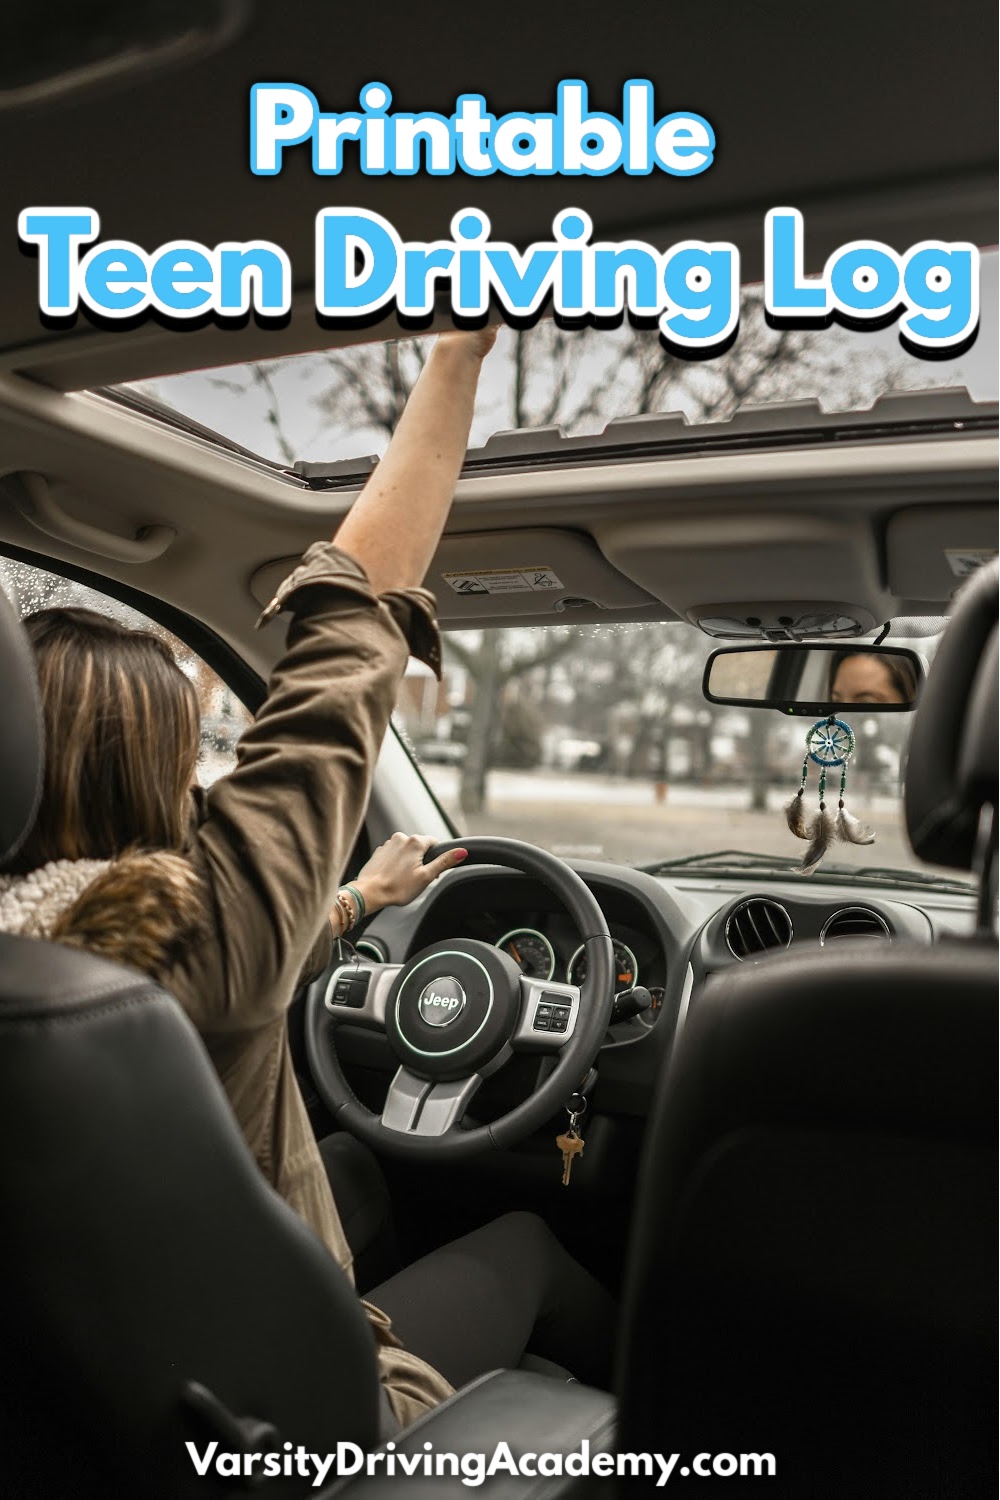 A printable teen driving log can help parents and teens stay on top of the driving practice they need to become safe drivers.